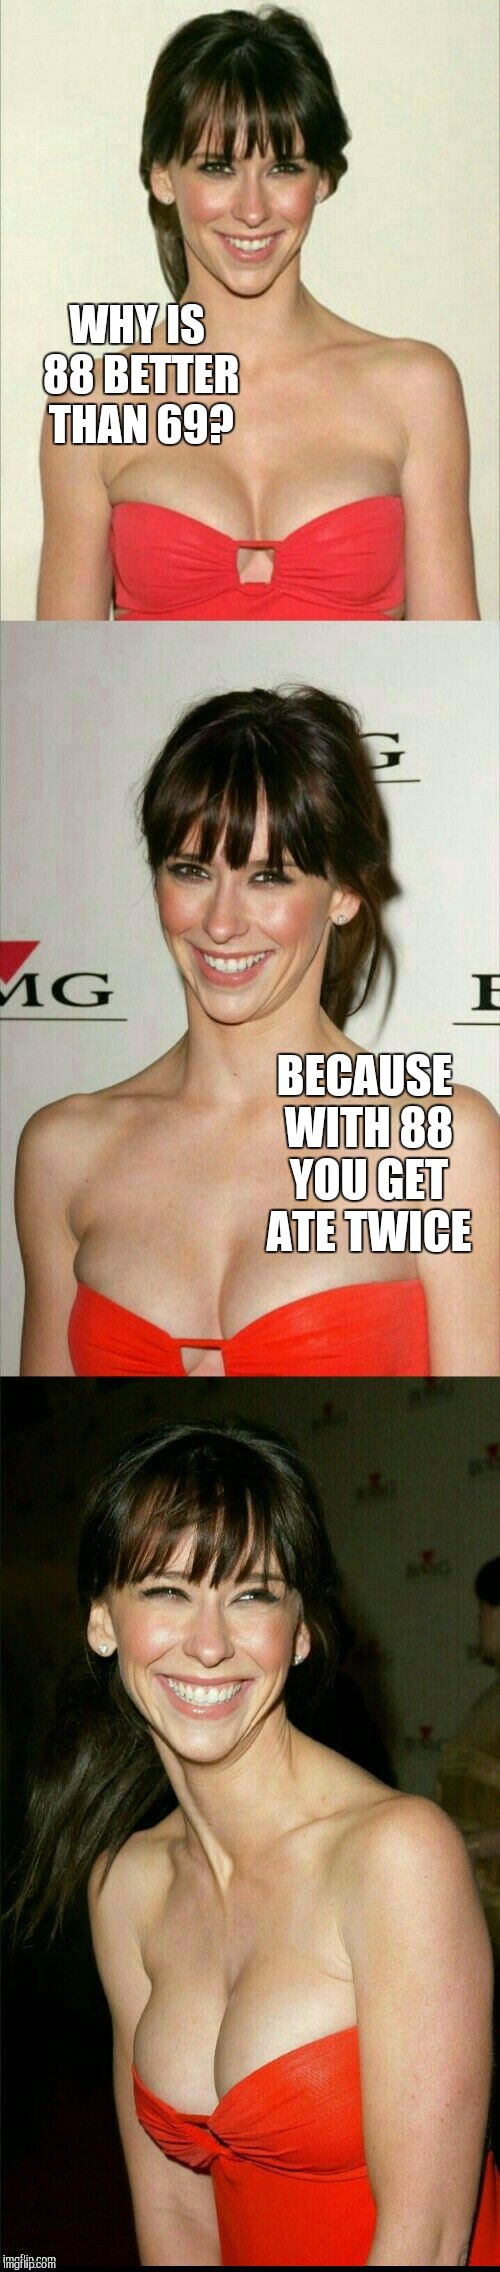 Jennifer Love Hewitt joke template  | WHY IS 88 BETTER THAN 69? BECAUSE WITH 88 YOU GET ATE TWICE | image tagged in jennifer love hewitt joke template,jbmemegeek,jennifer love hewitt,memes | made w/ Imgflip meme maker